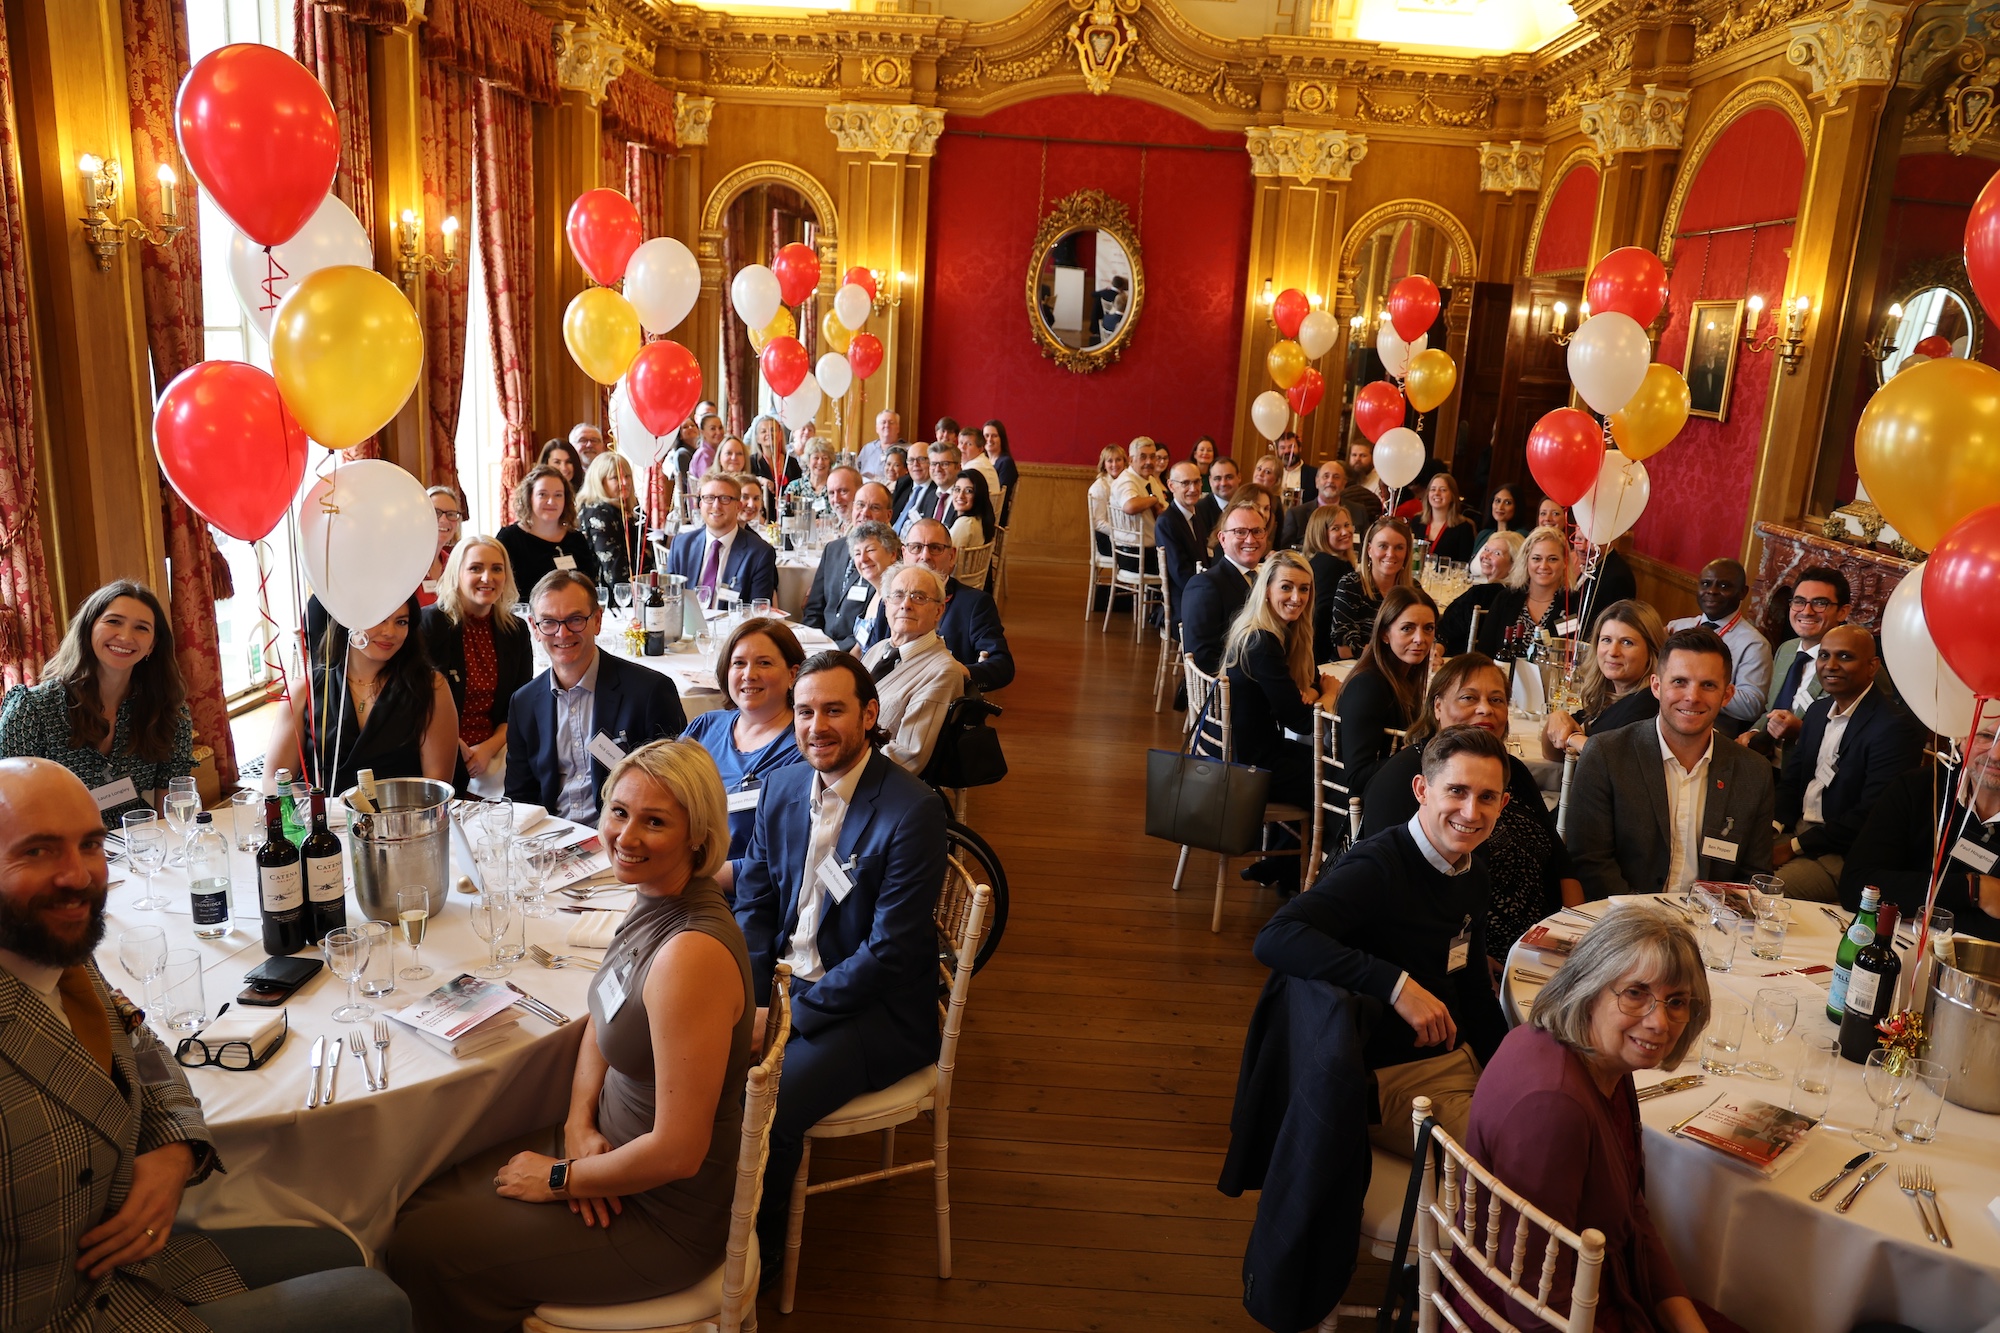 A group shot of everyone who attended the LA's 40th celebration event in Hylands House in November 2023